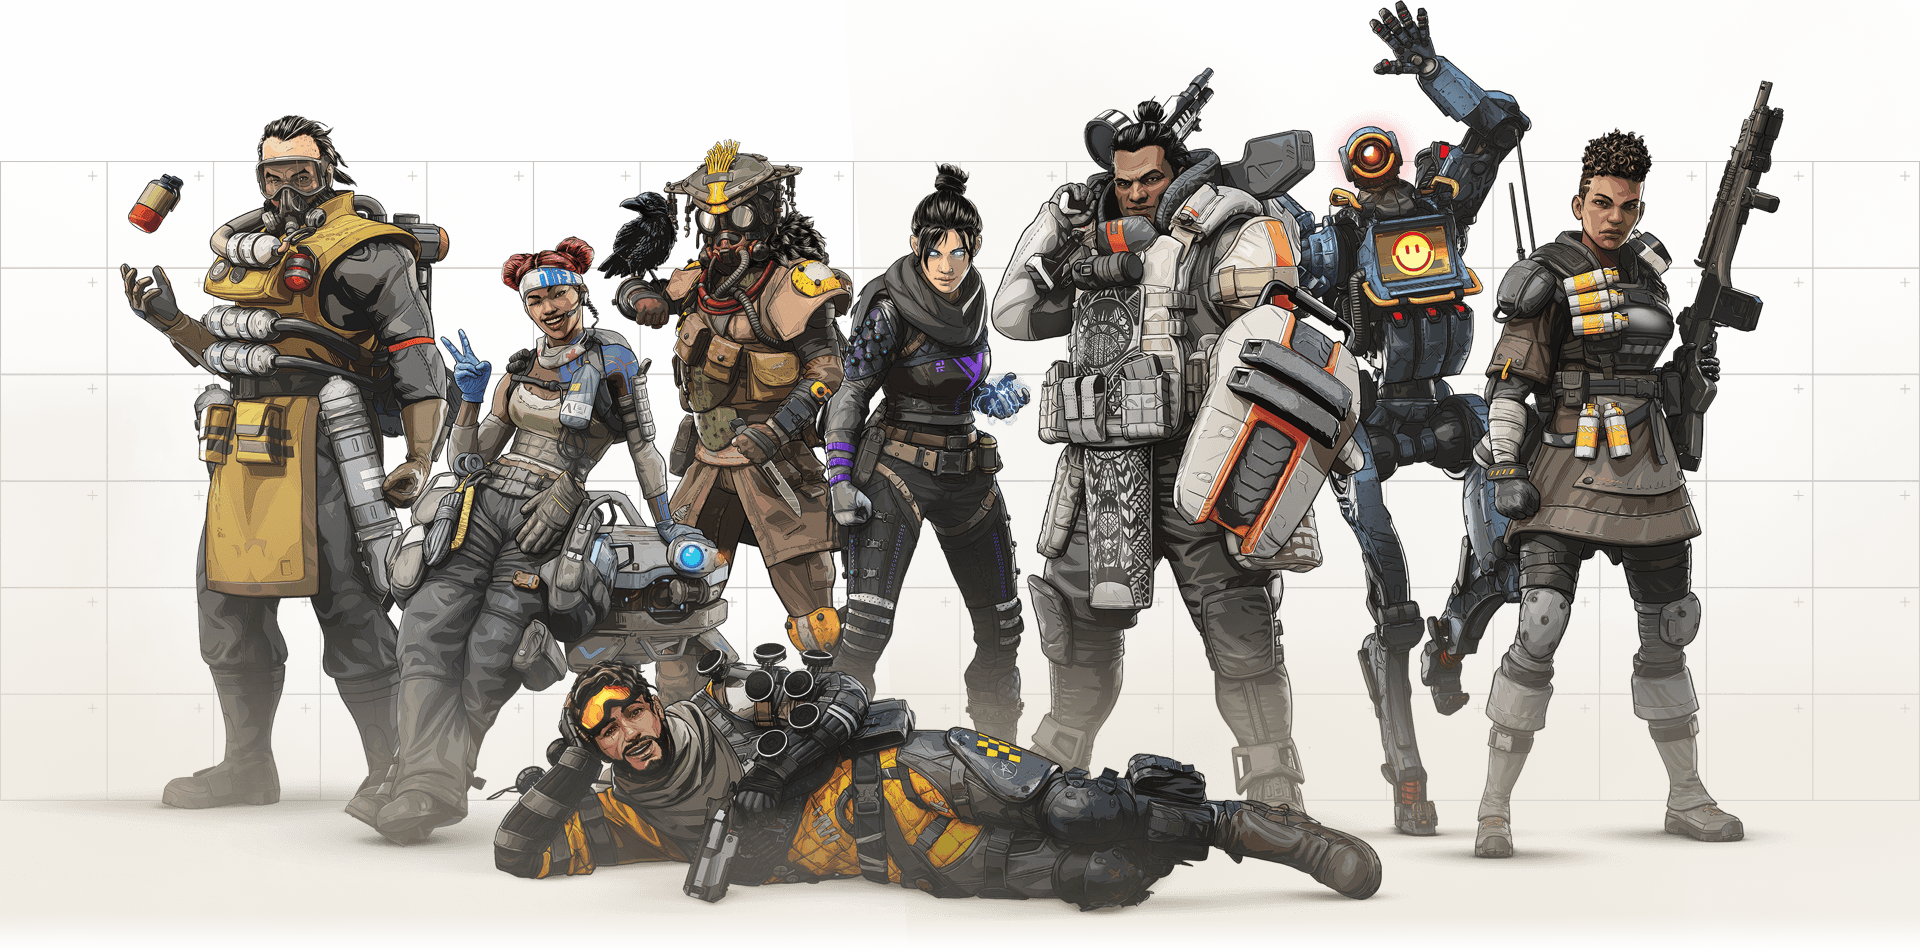 apex legends review better than fortnite in almost every way inverse - fortnite battle royale max team size